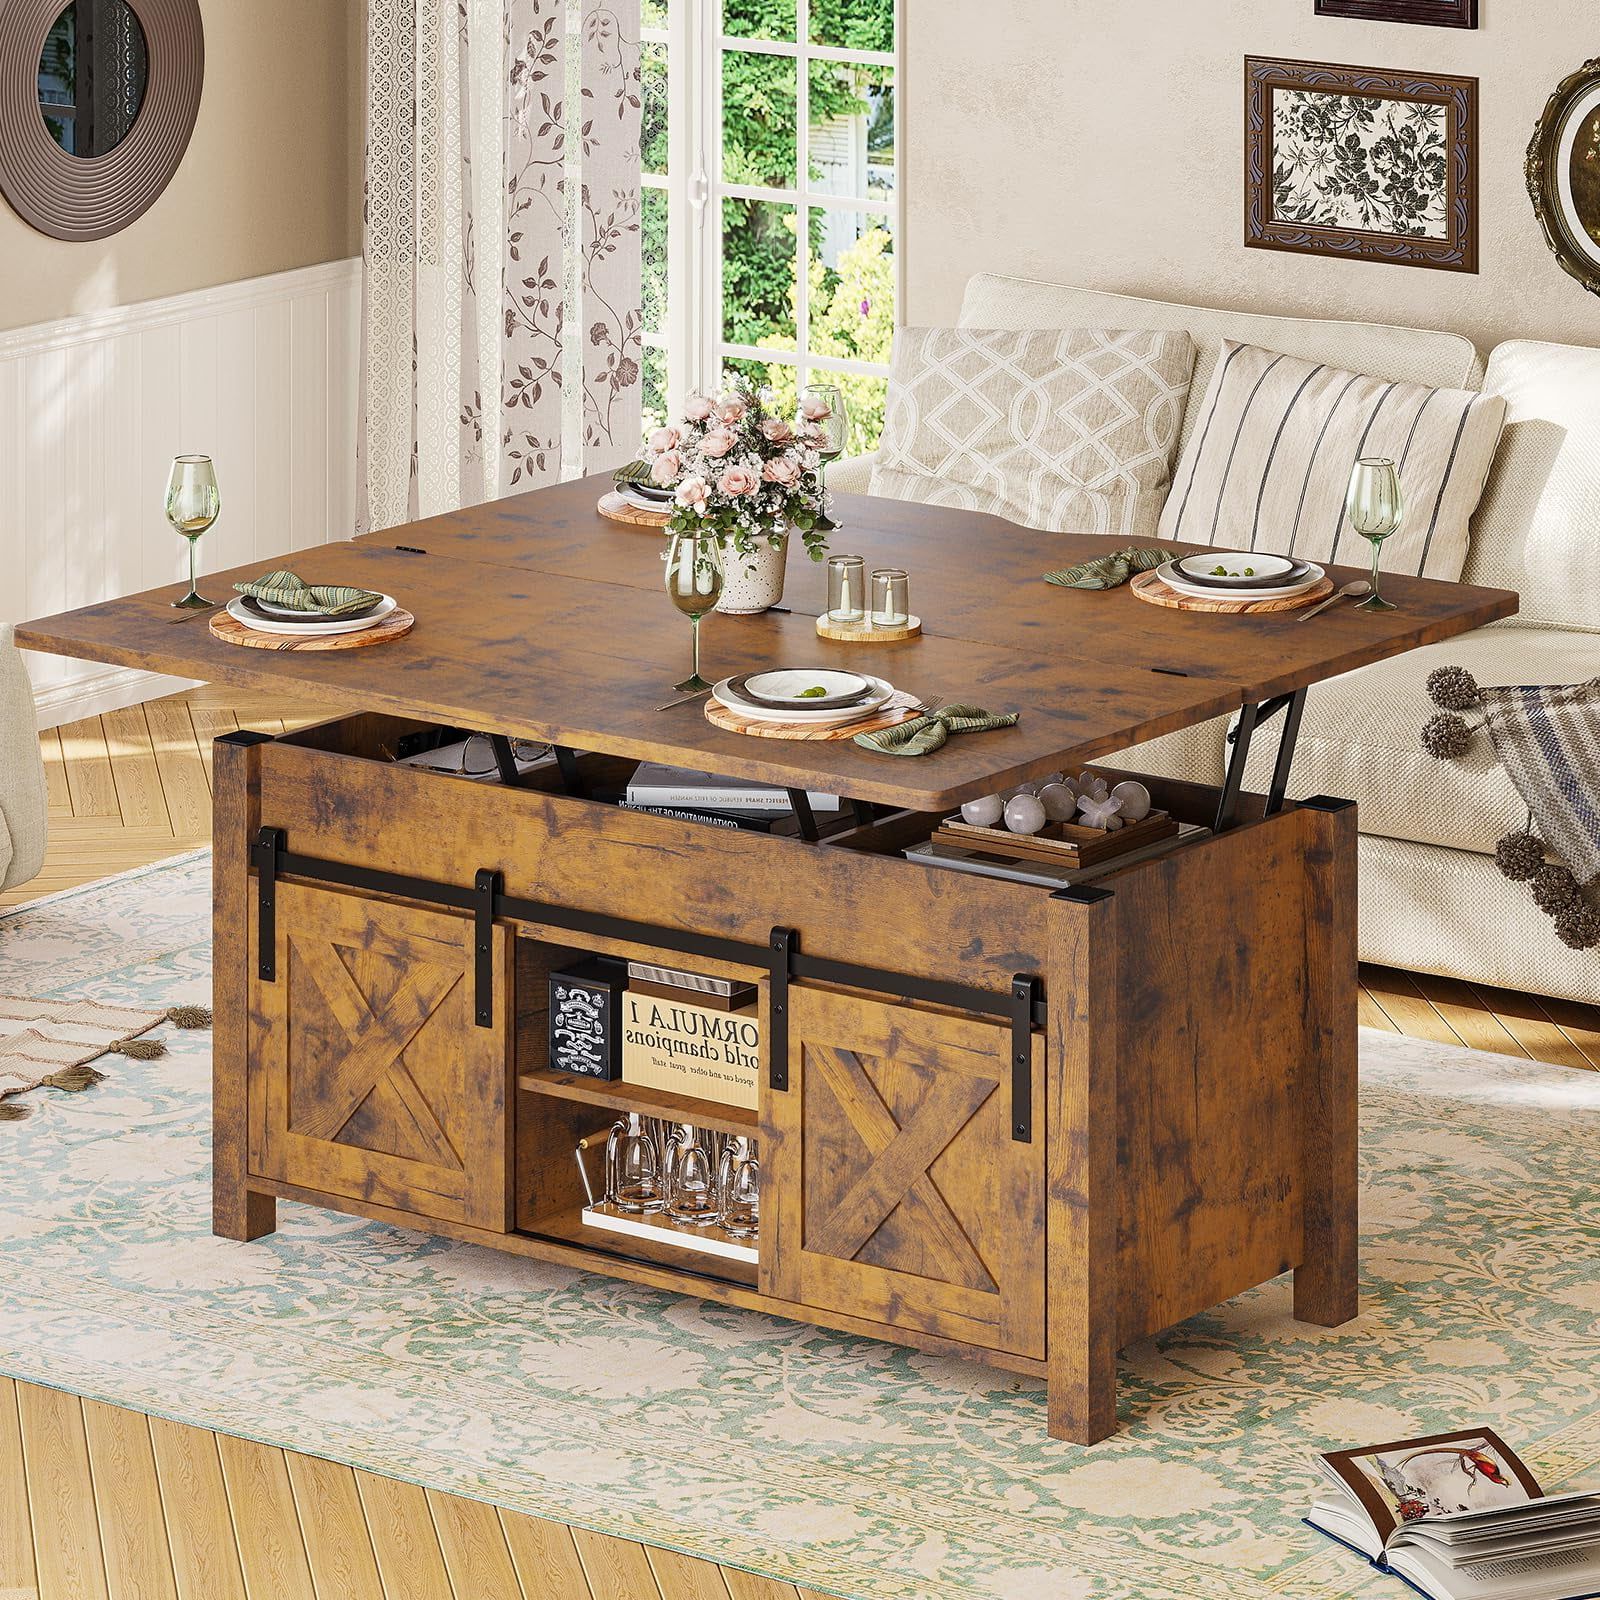 Farmhouse Lift Top Tables Throughout Well Known Coffee Table For Living Room, Farmhouse Lift Top Coffee Tables With Storage  And Hidden Compartment, Rising Tabletop Center Table For Living Room  Reception Room, Rustic Brown – Walmart (Photo 10 of 10)